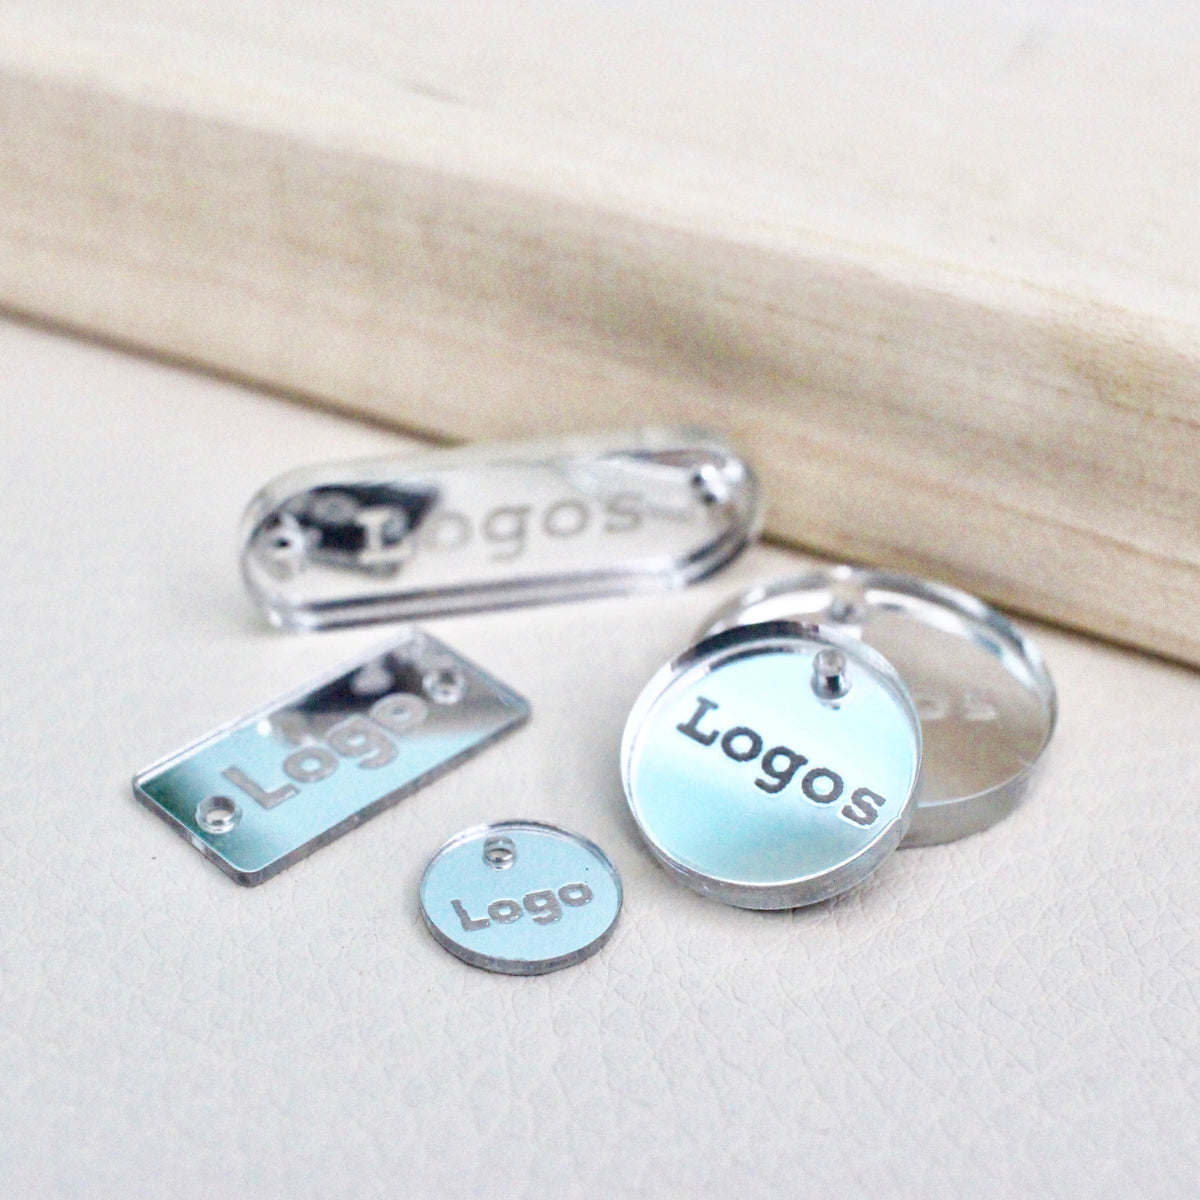 Set of 50 Silver mirrored acrylic tags with personalized logo or text –  Cutpie Studio